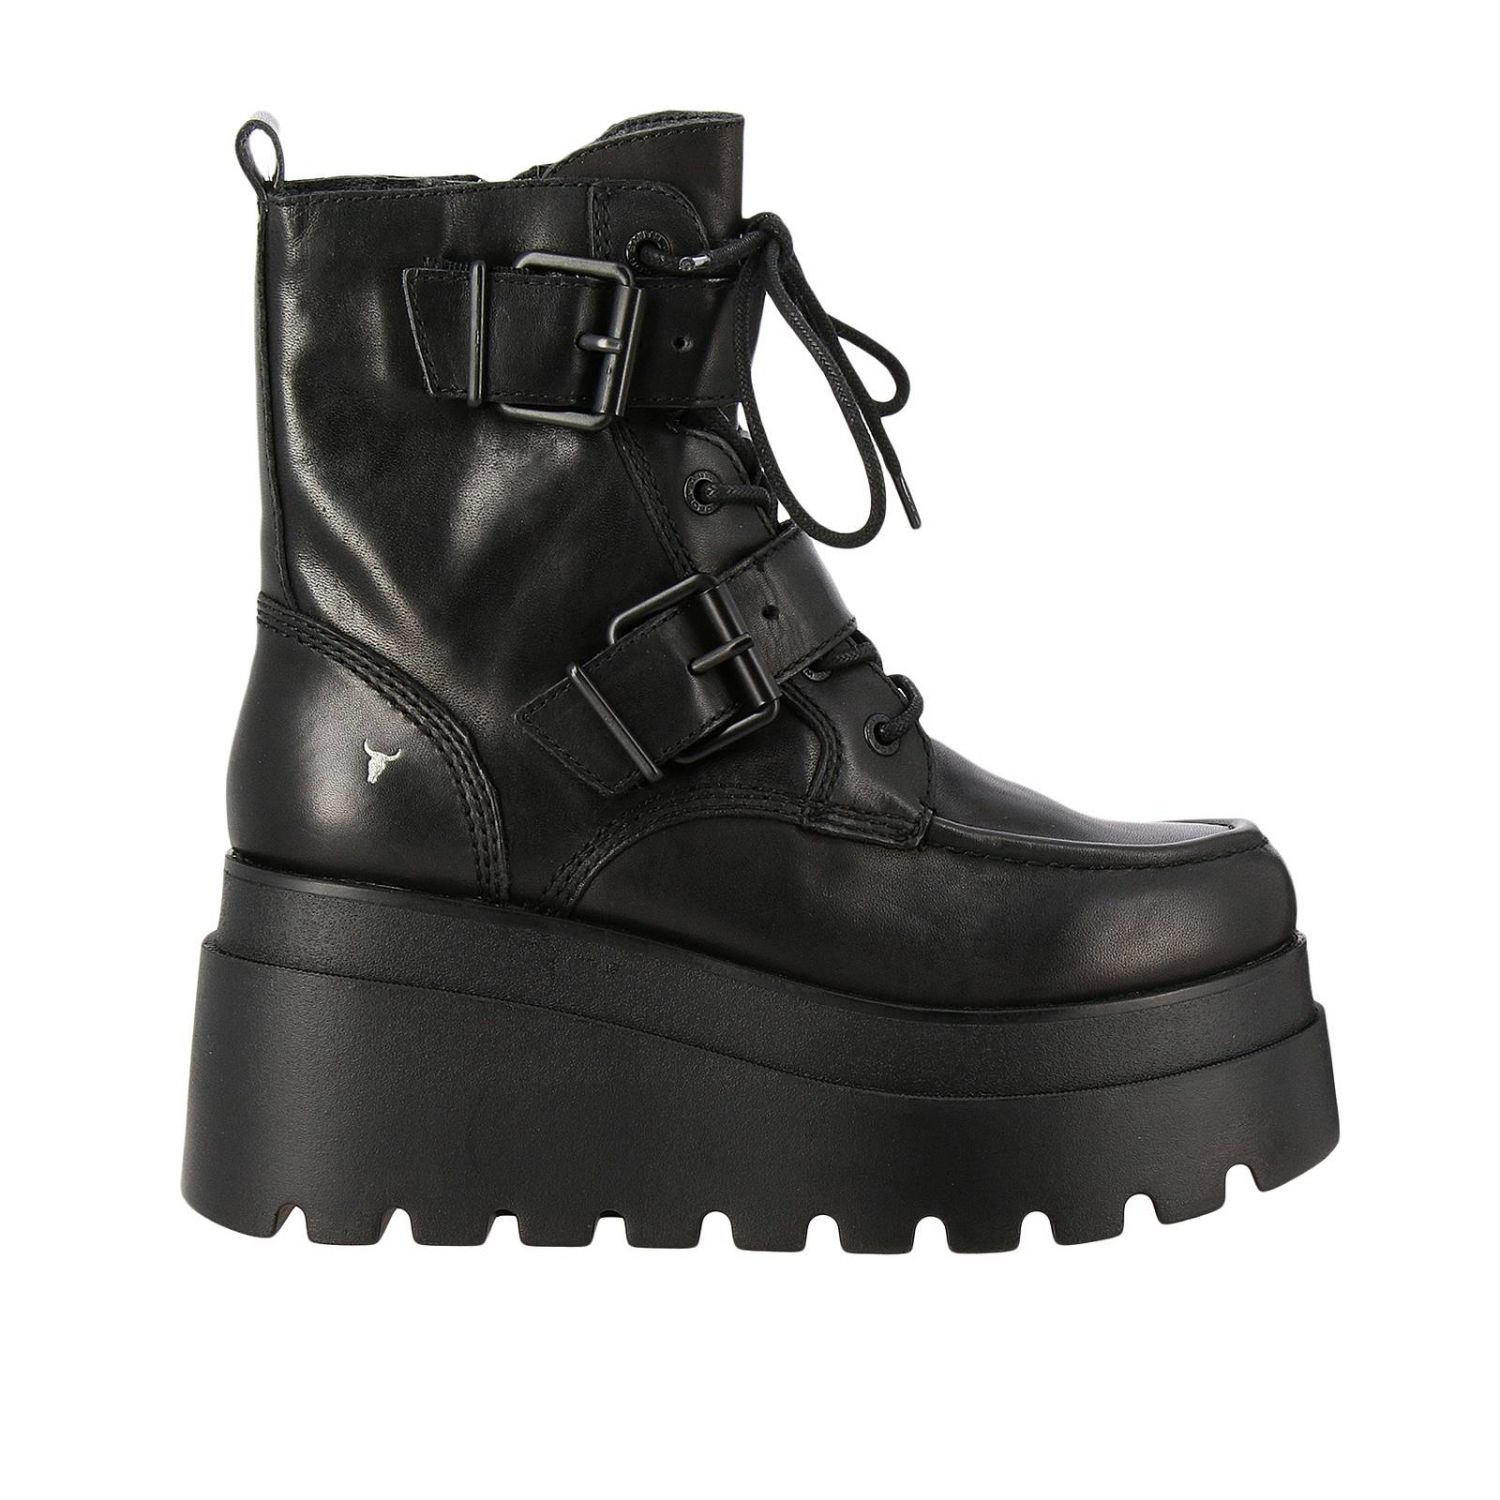 Windsorsmith Asap Outlet: flat ankle boots for women - Black ...